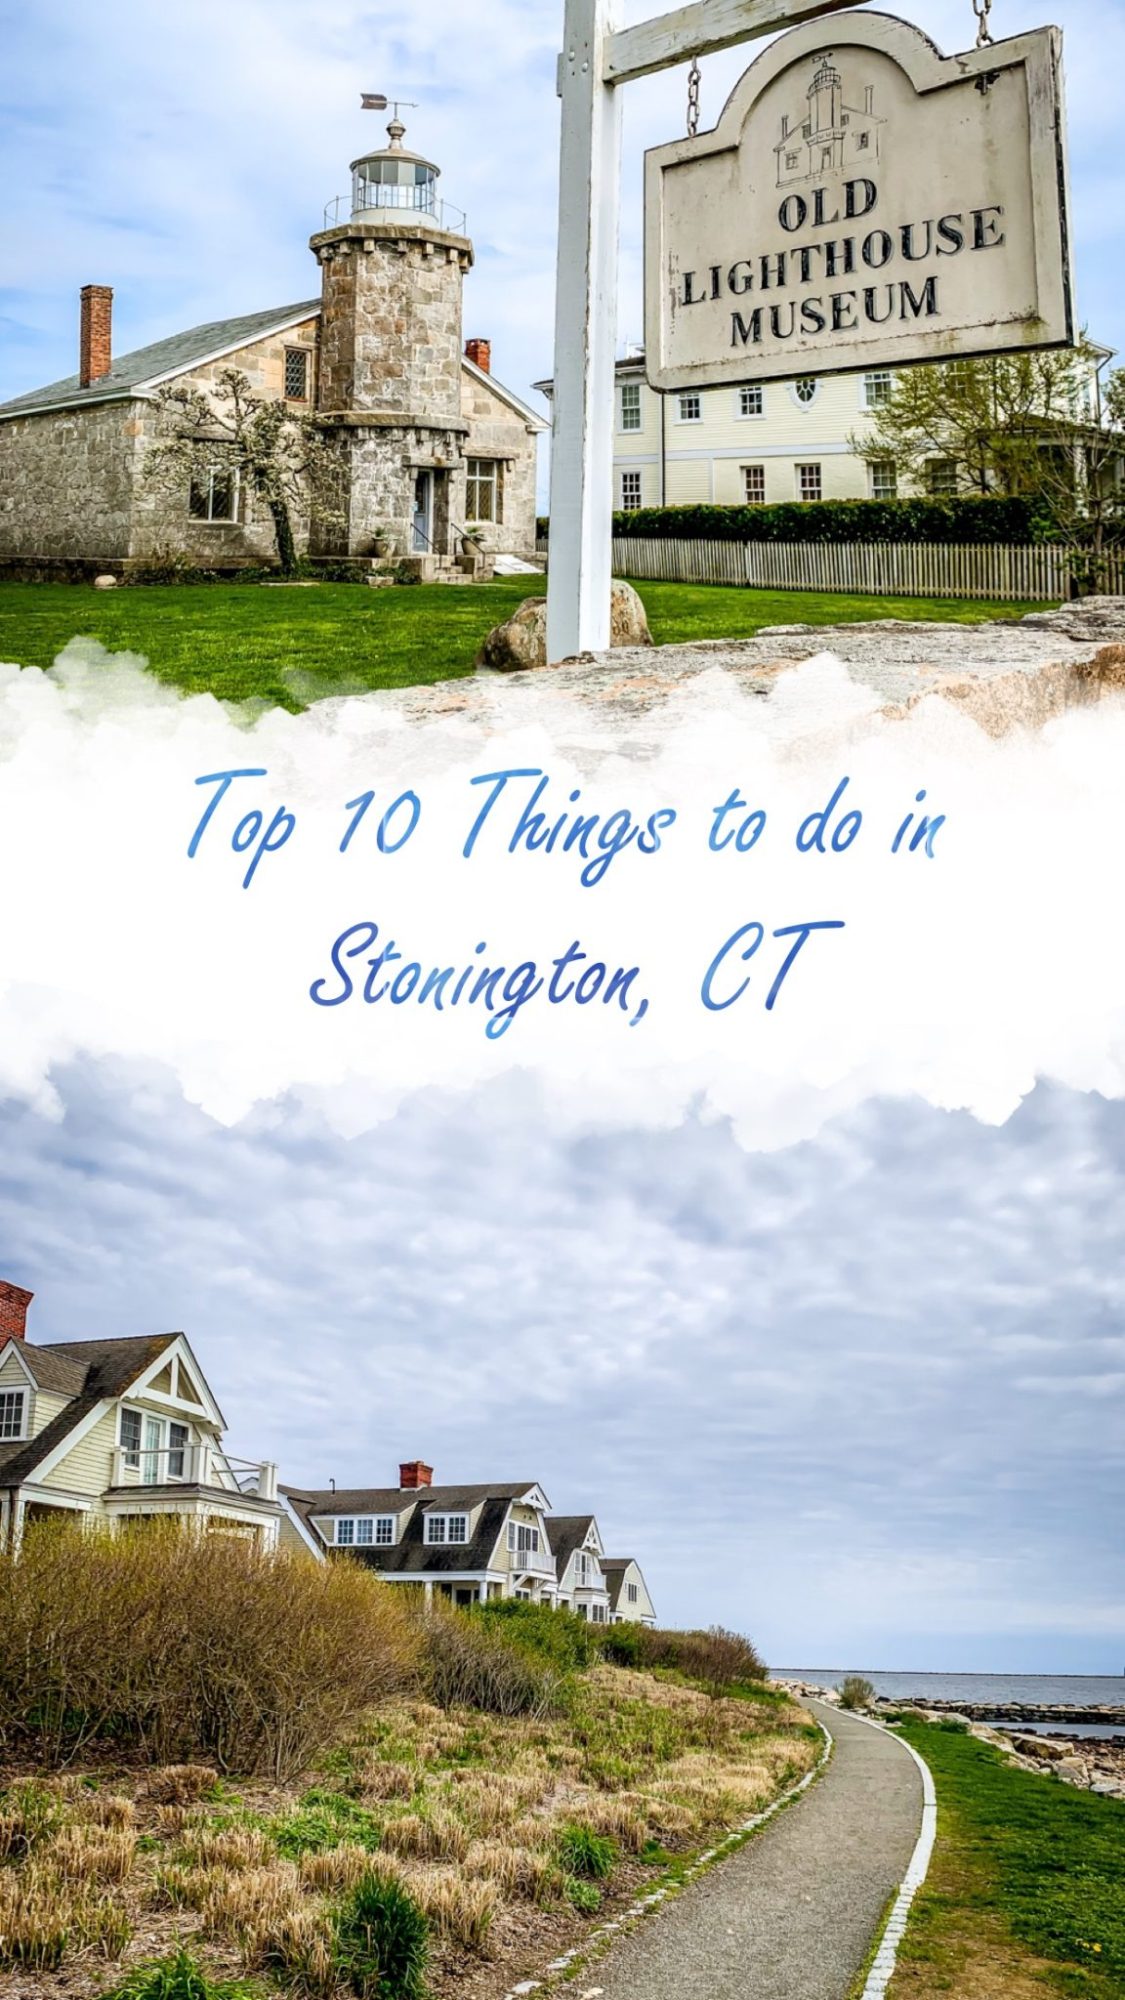 Top 10 Things to Do in Stonington CT on your Weekend Getaway featured by top US travel blogger, Shannon Shipman